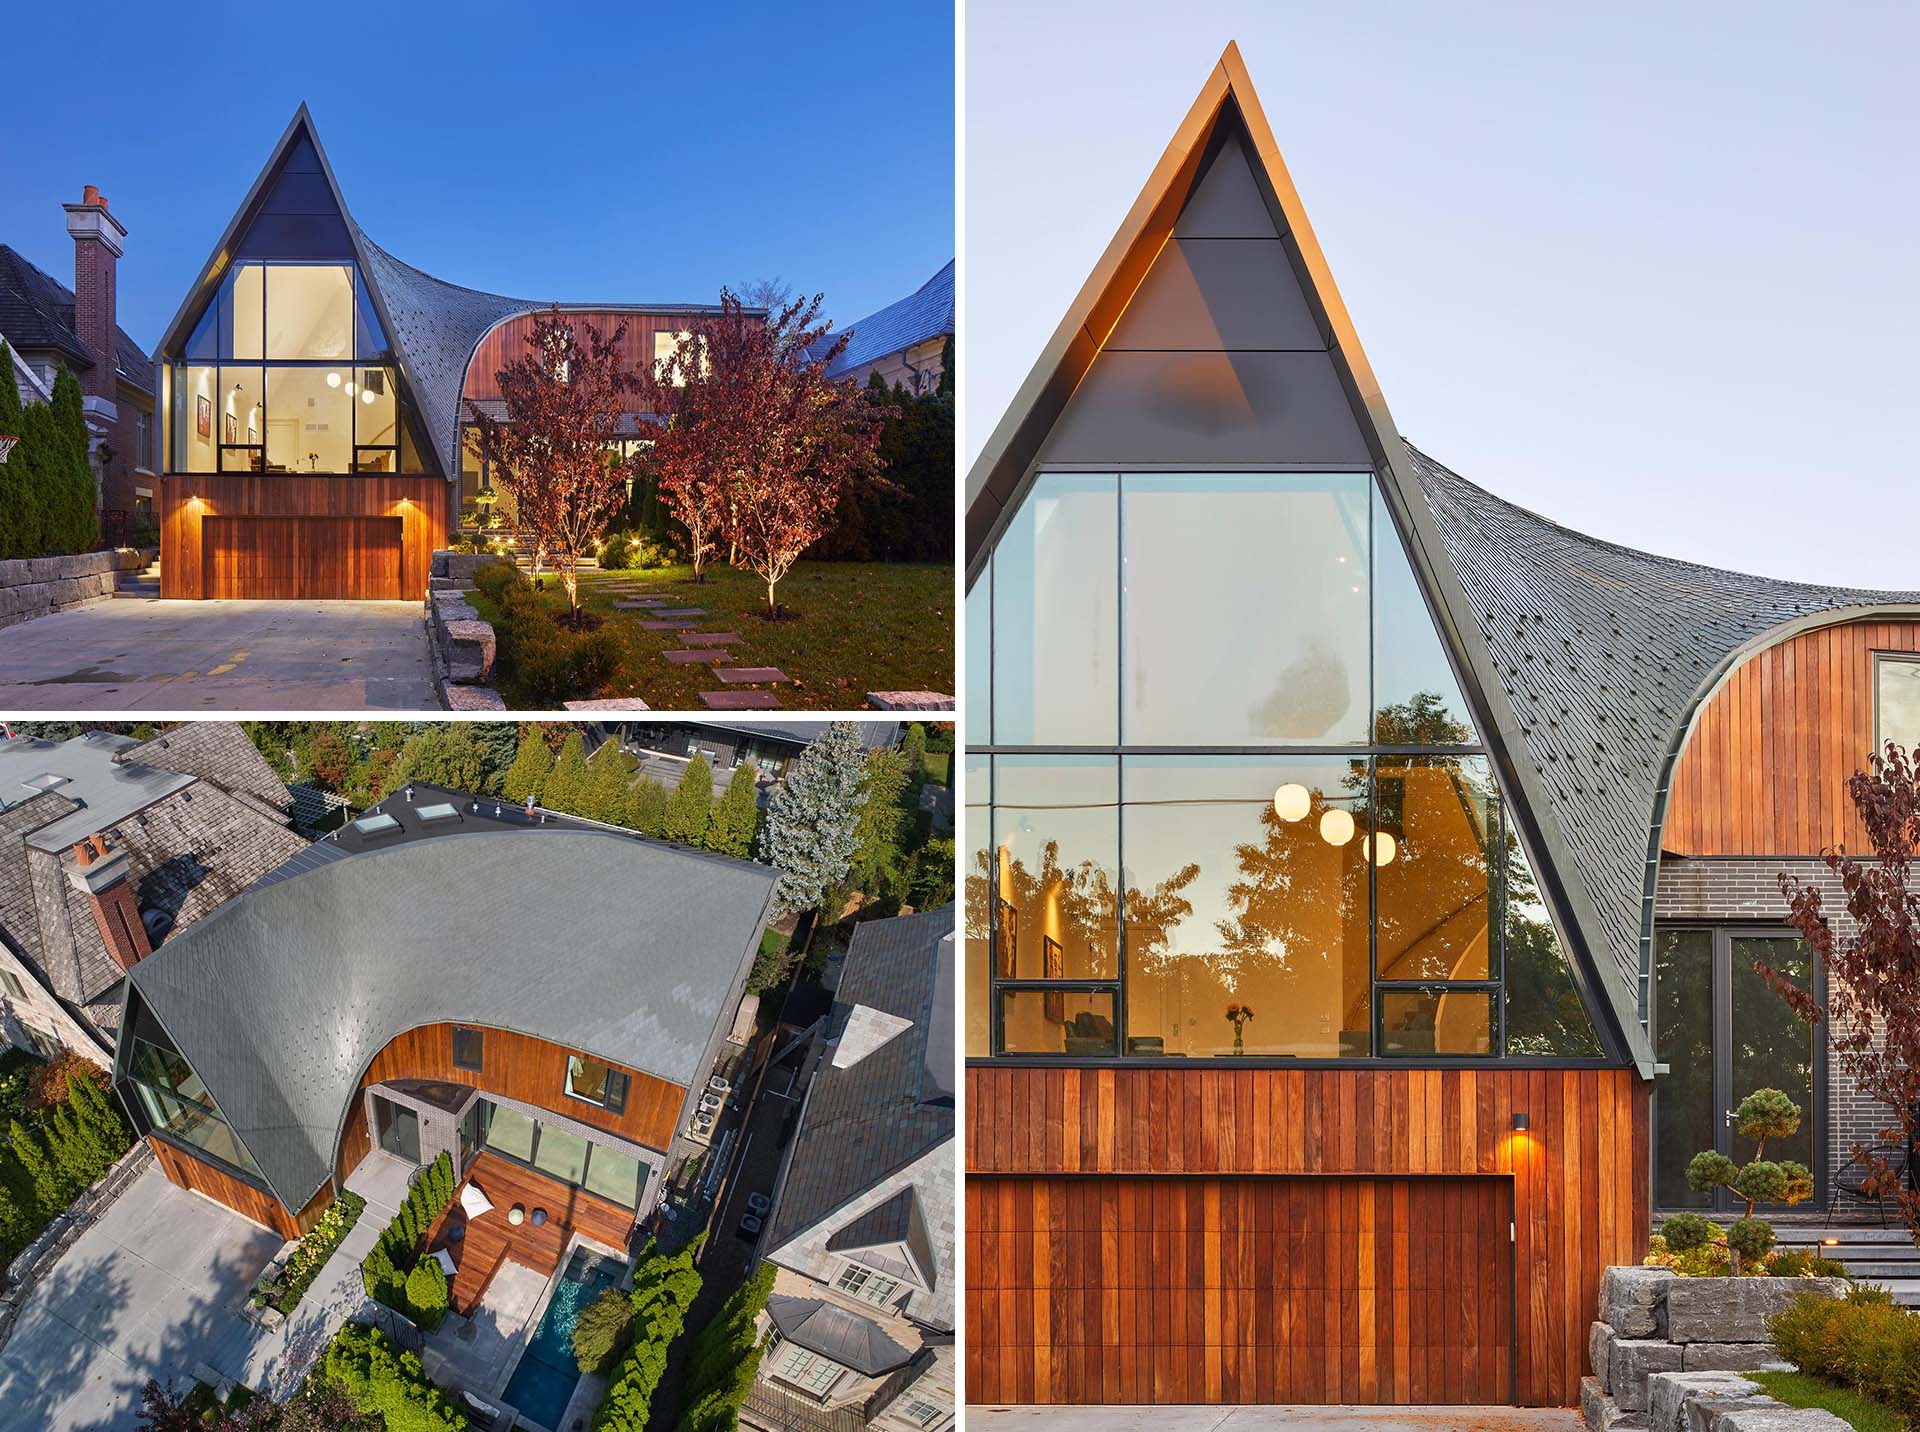 A modern home with a curved roof, an L-shaped design, and a A-frame accent.